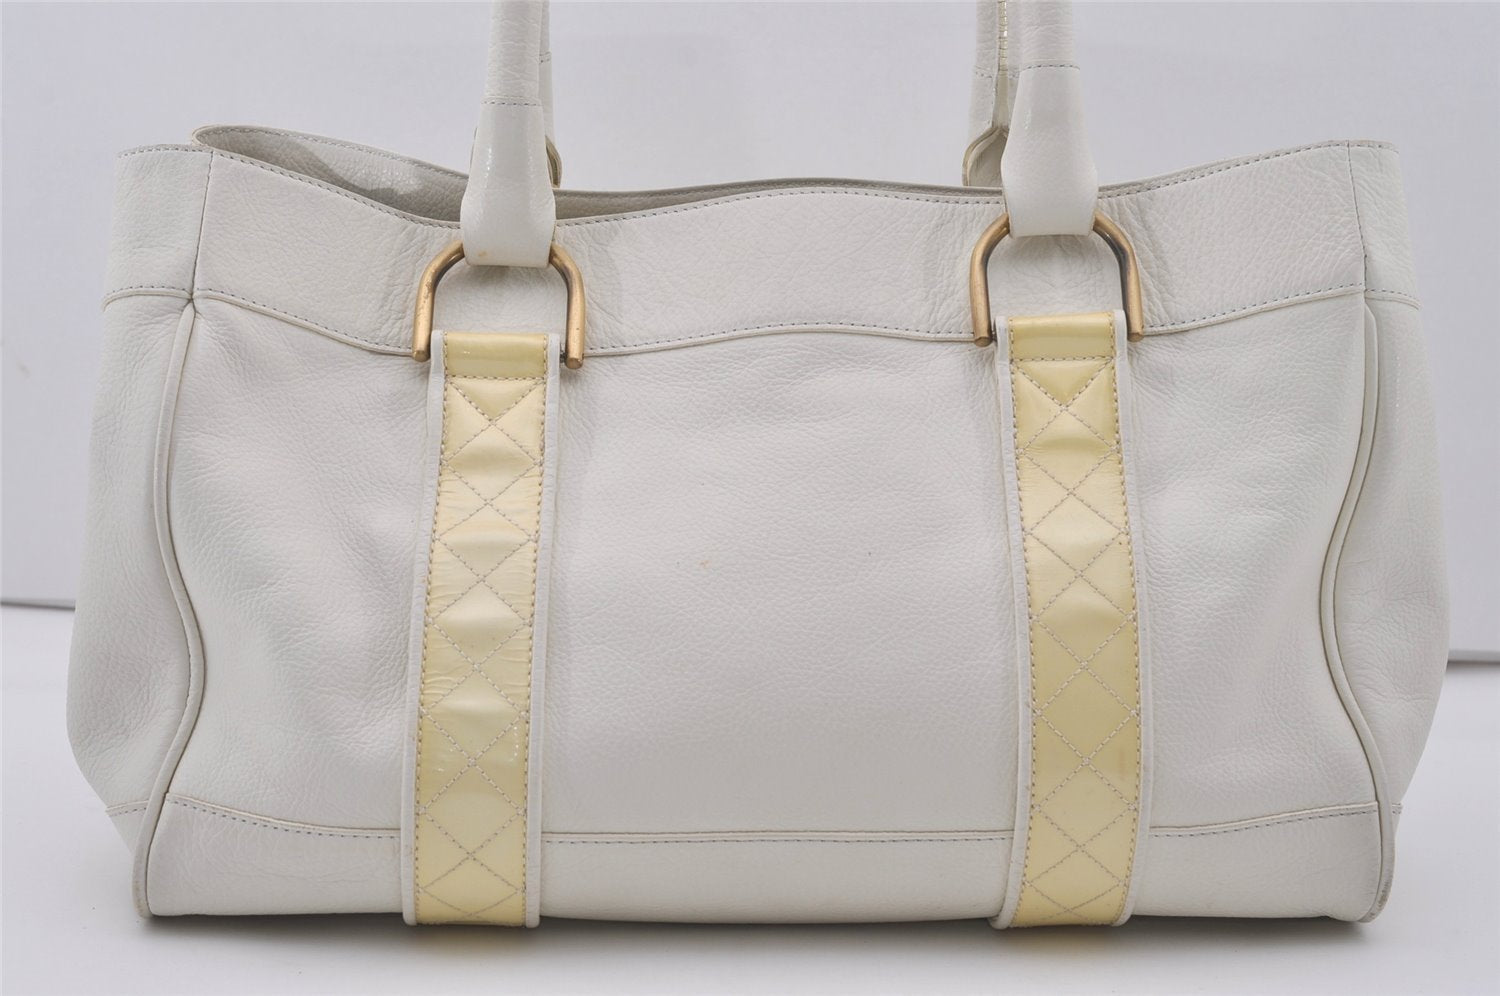 Authentic BURBERRY Vintage Leather Shoulder Tote Bag White 7178I